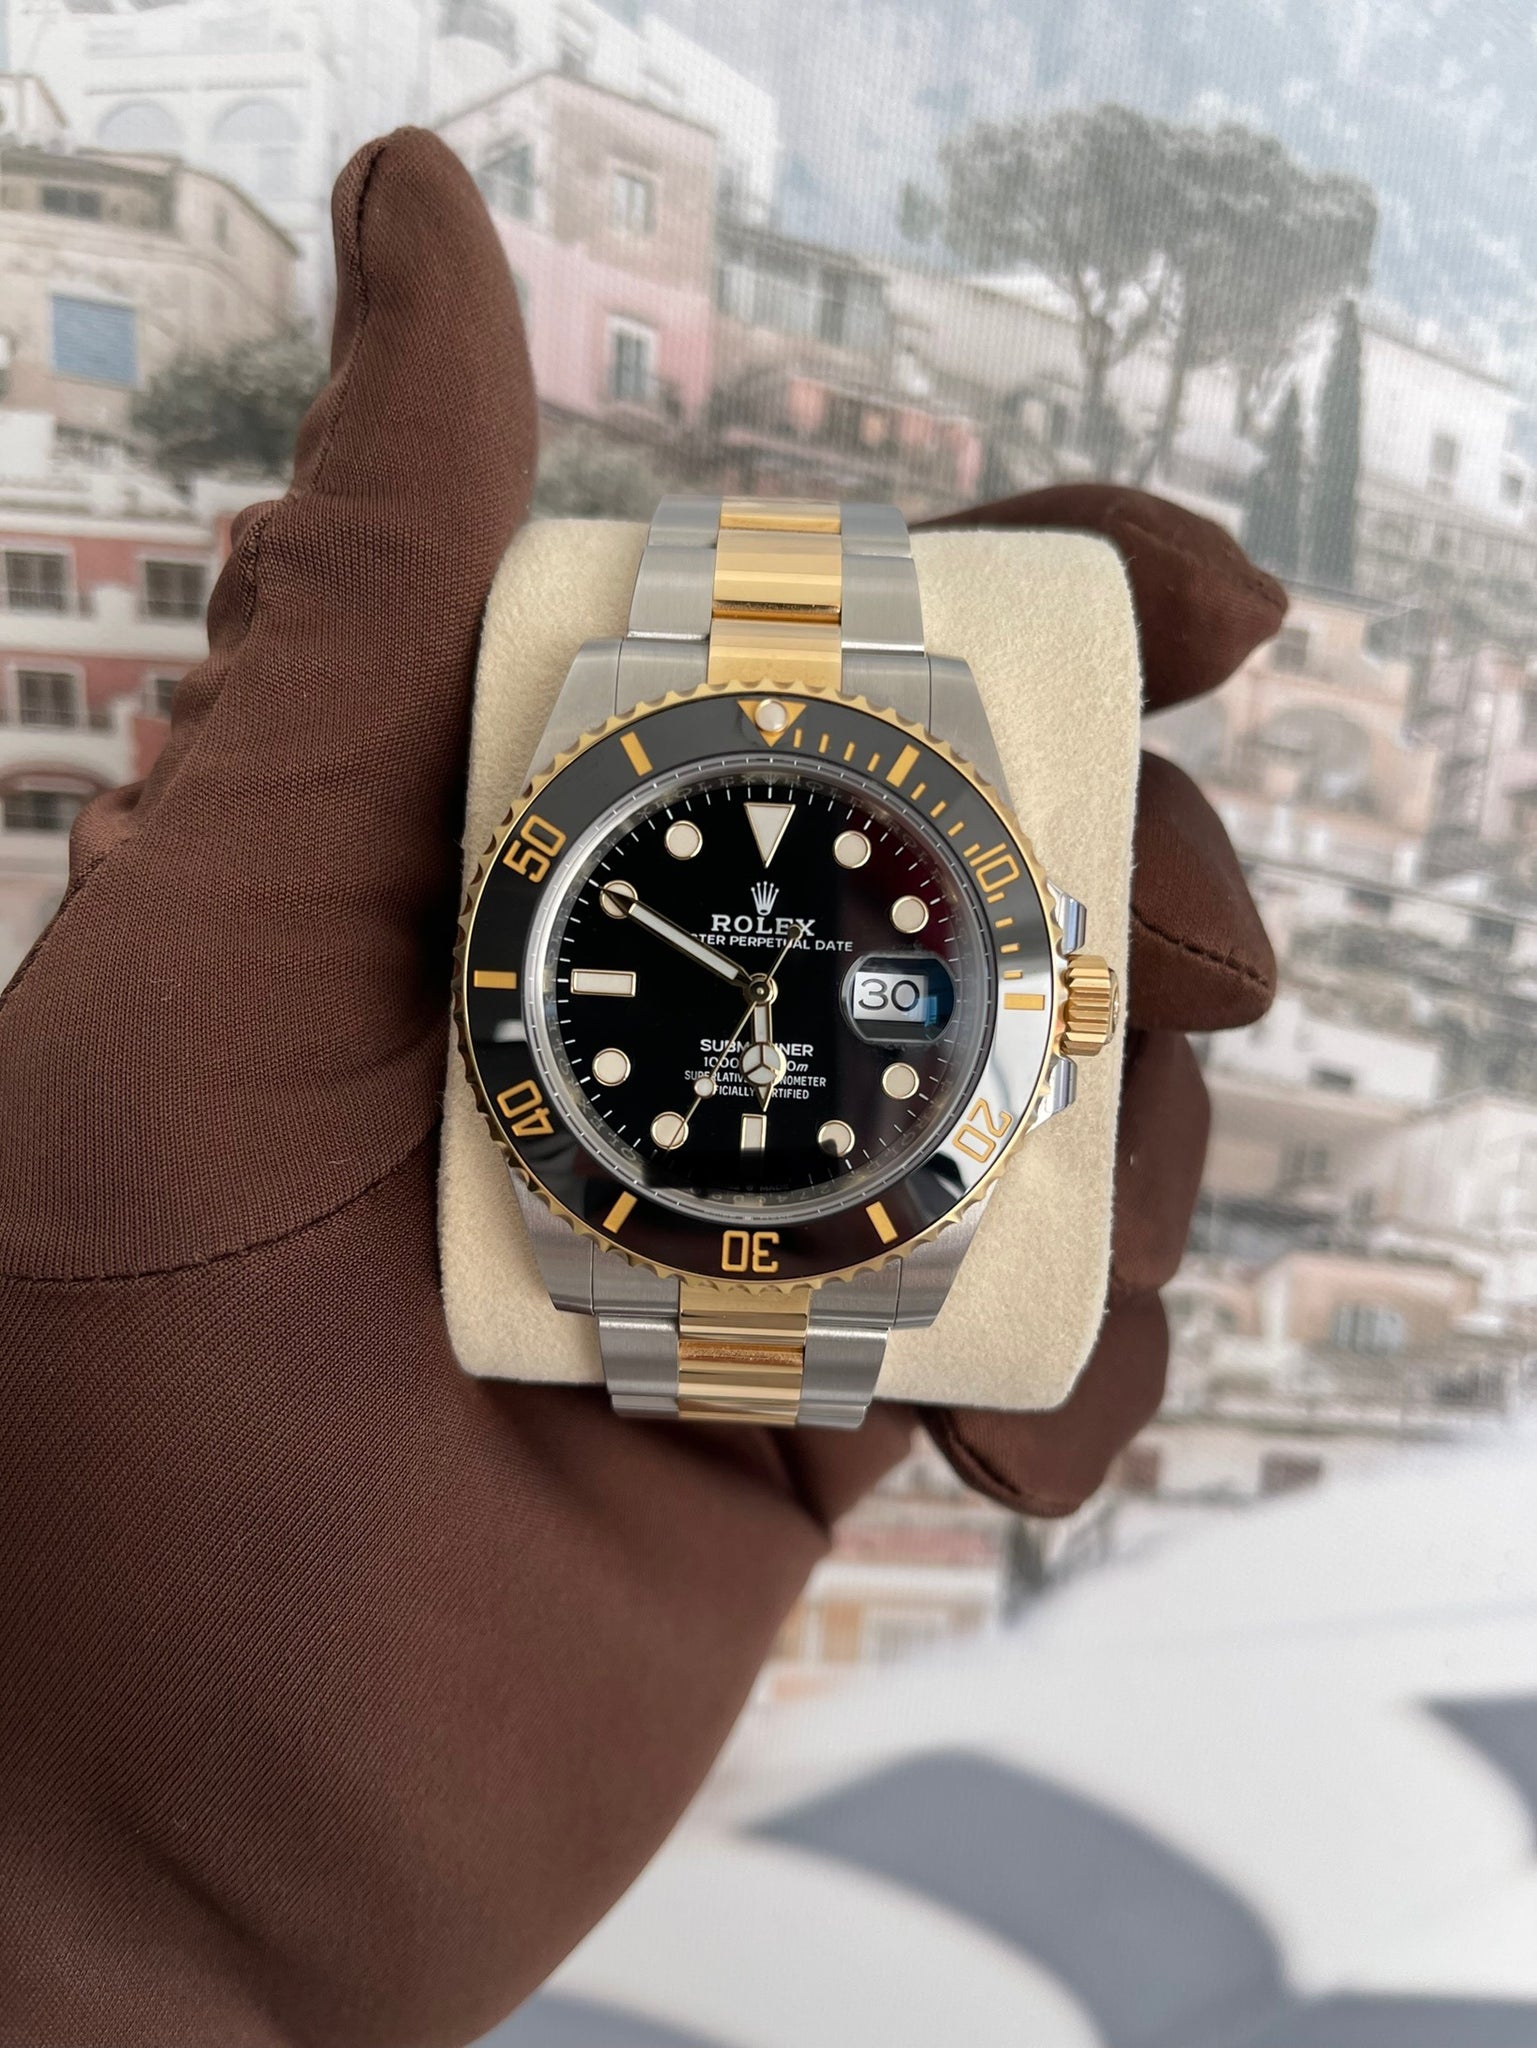 2021 Rolex Submariner Two-Tone "Black Dial" (126613LN)